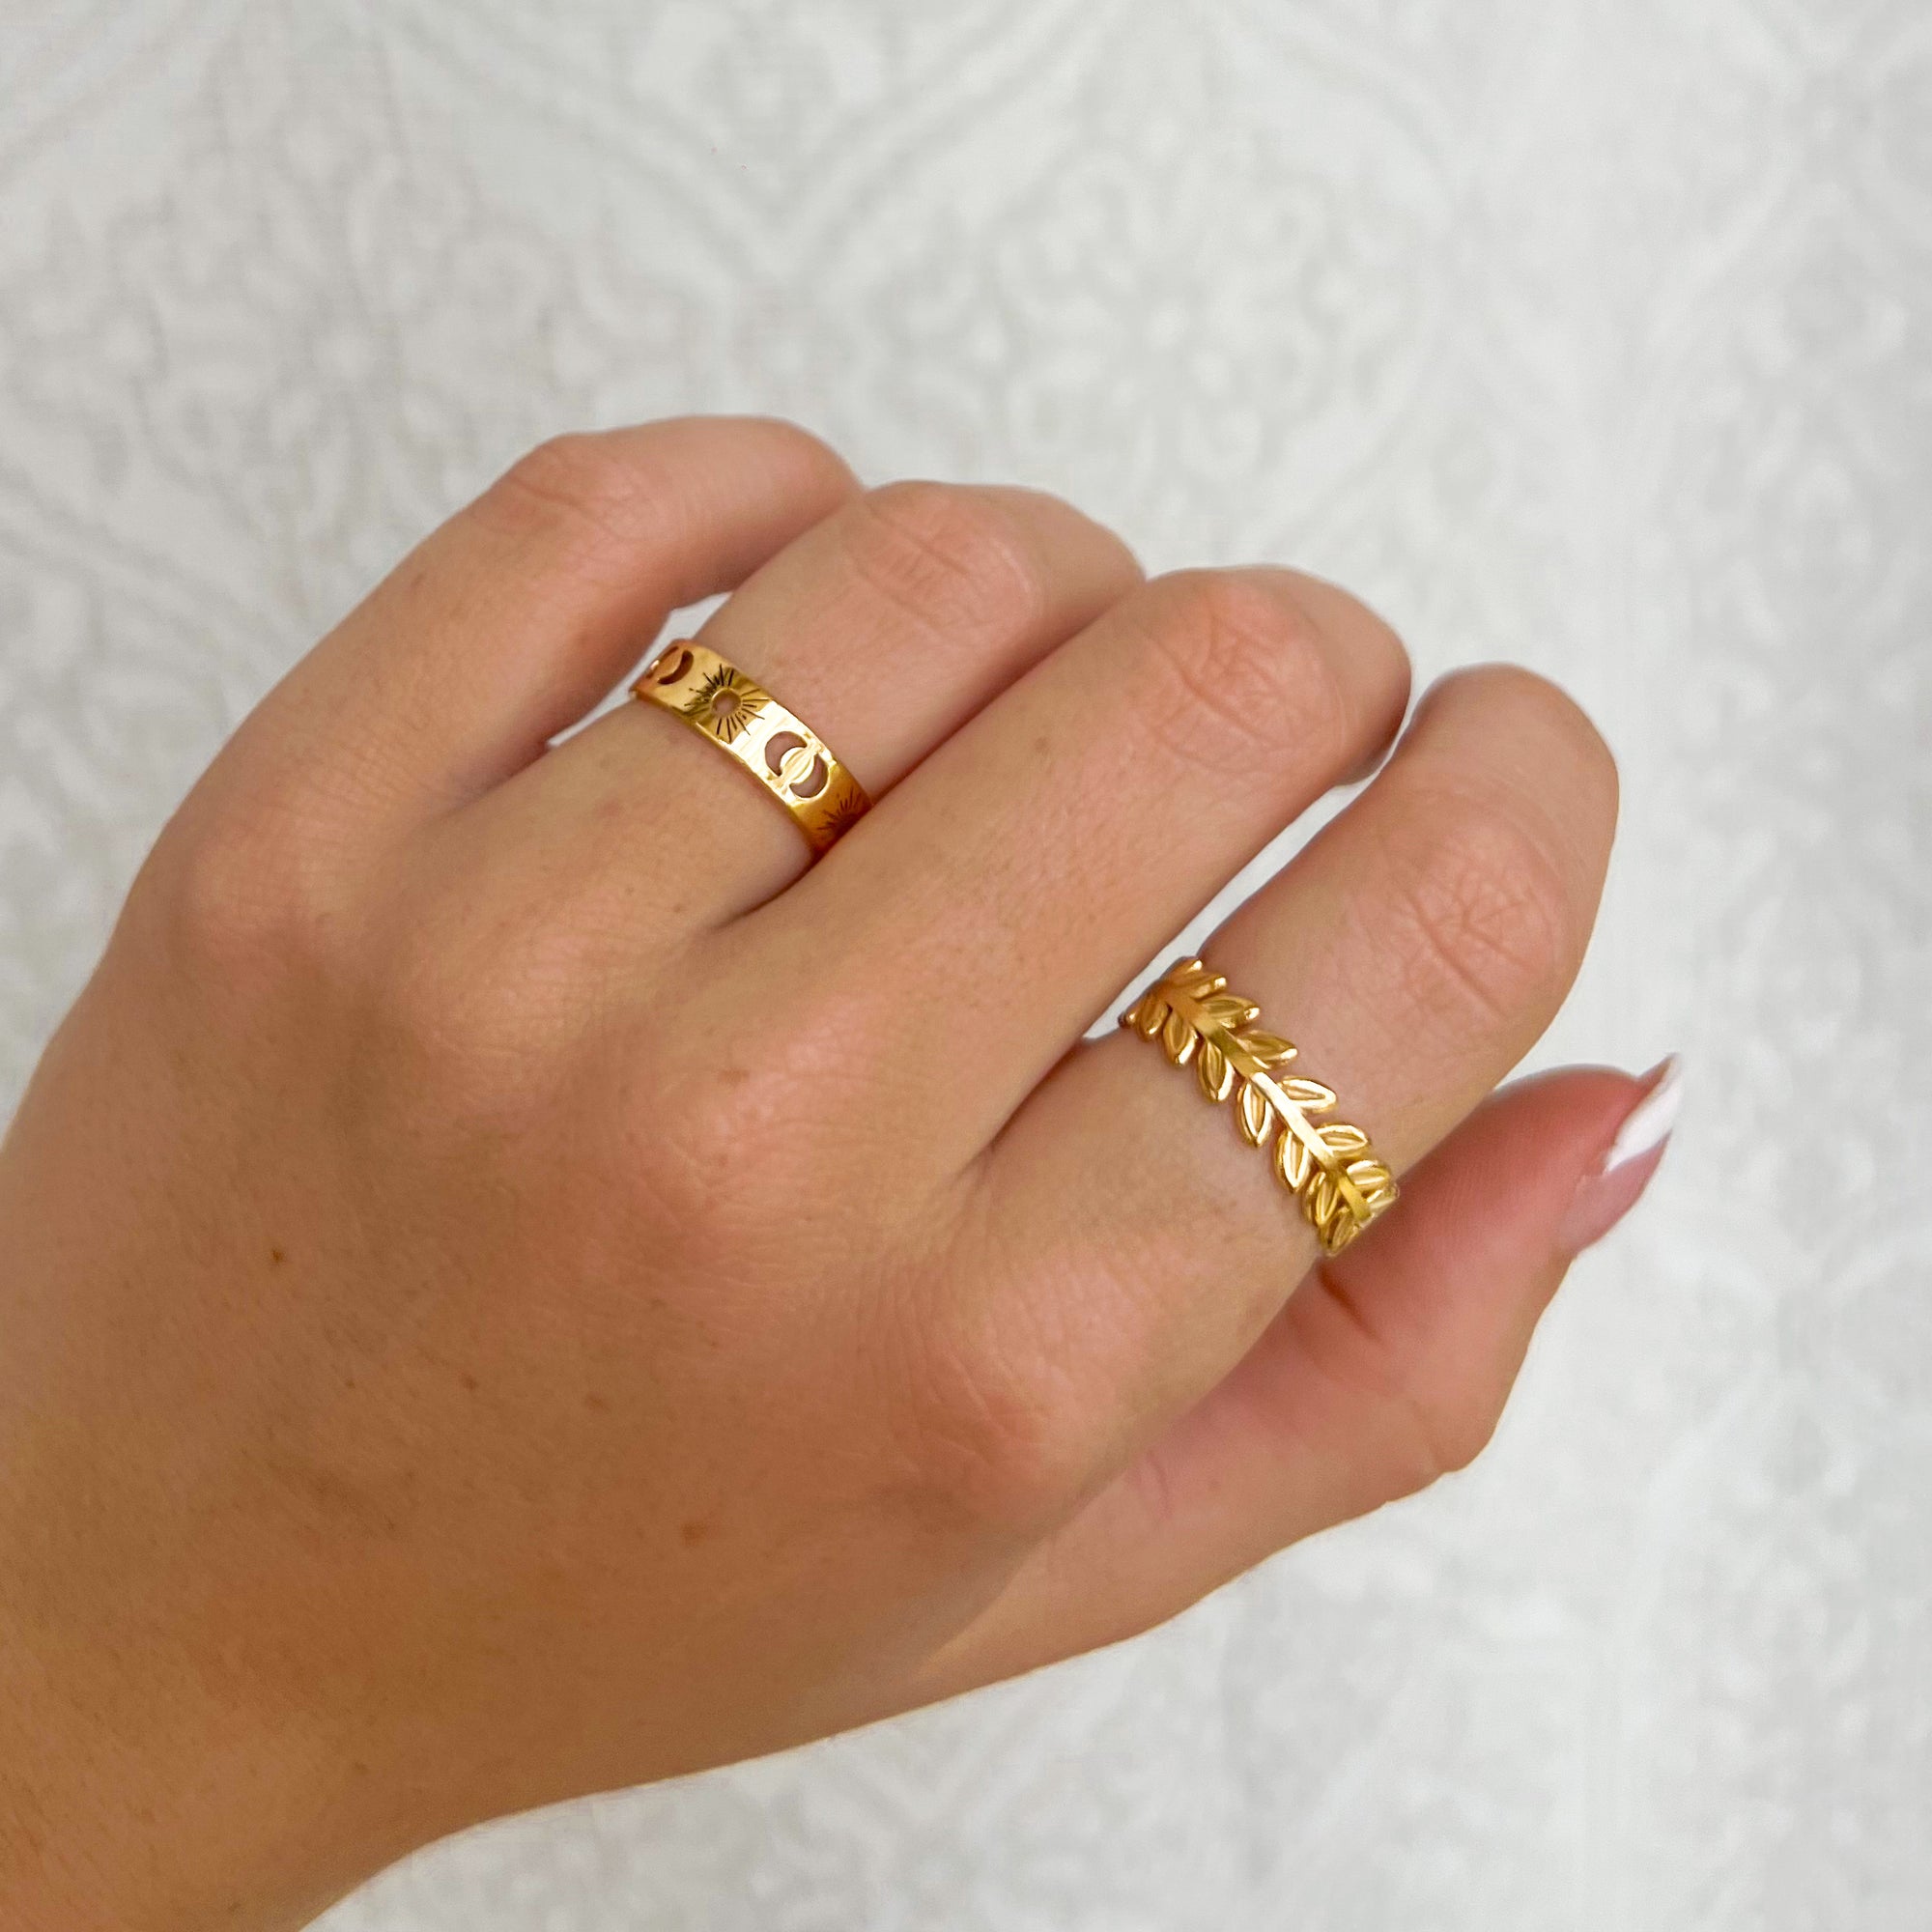 Ivy Ring - For the Girls Jewelry